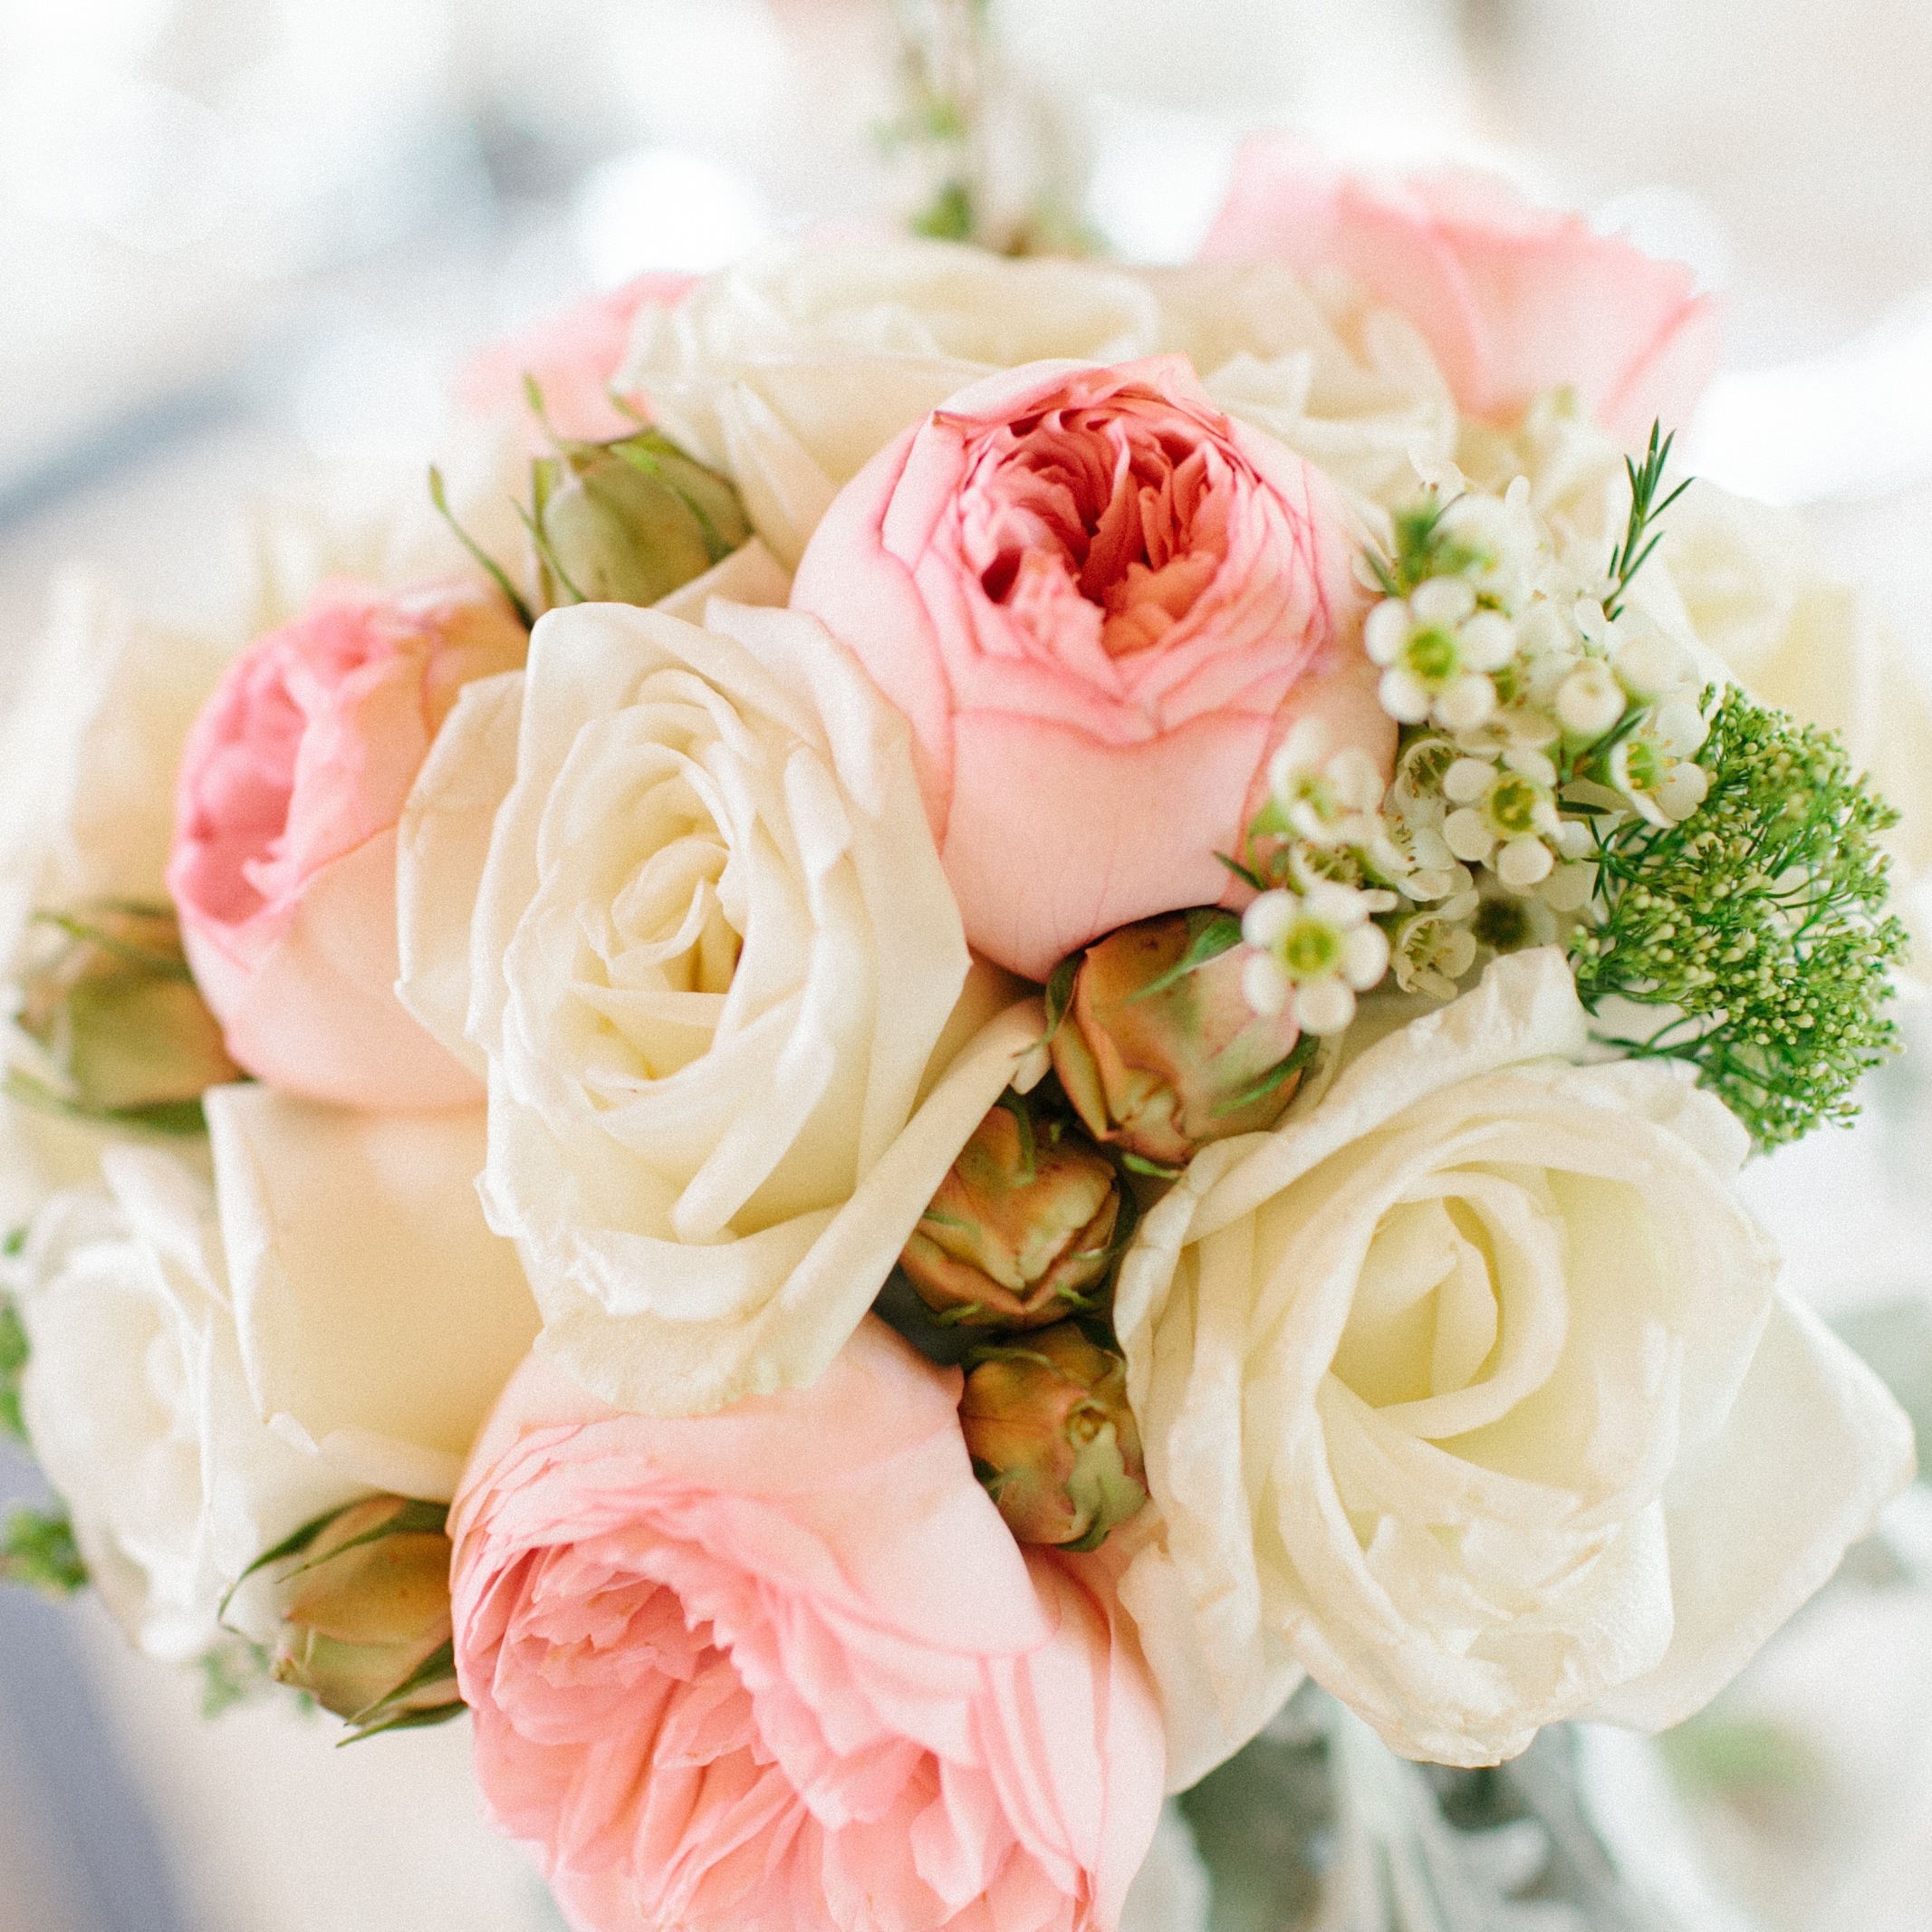  Pretty Pastel Pink and White Wedding Bouquet | photo by blf Studios | flowers by Norwood Florist | wedding by Madeline's Weddings 